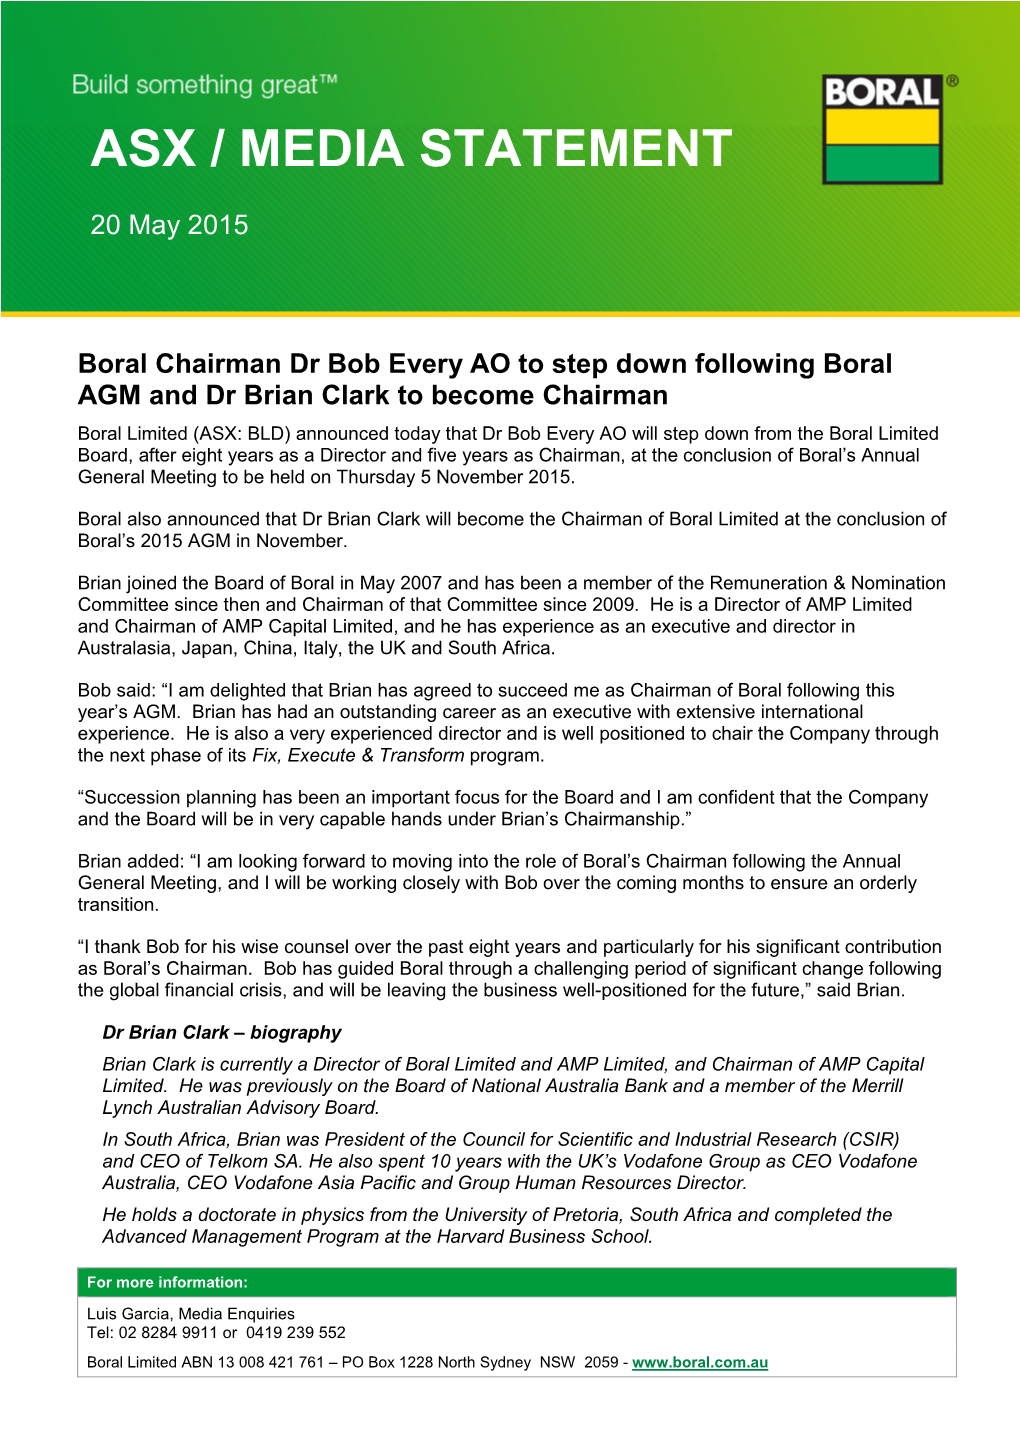 Boral Chairman Dr Bob Every AO to Step Down Following Boral AGM and Dr Brian Clark to Become Chairman